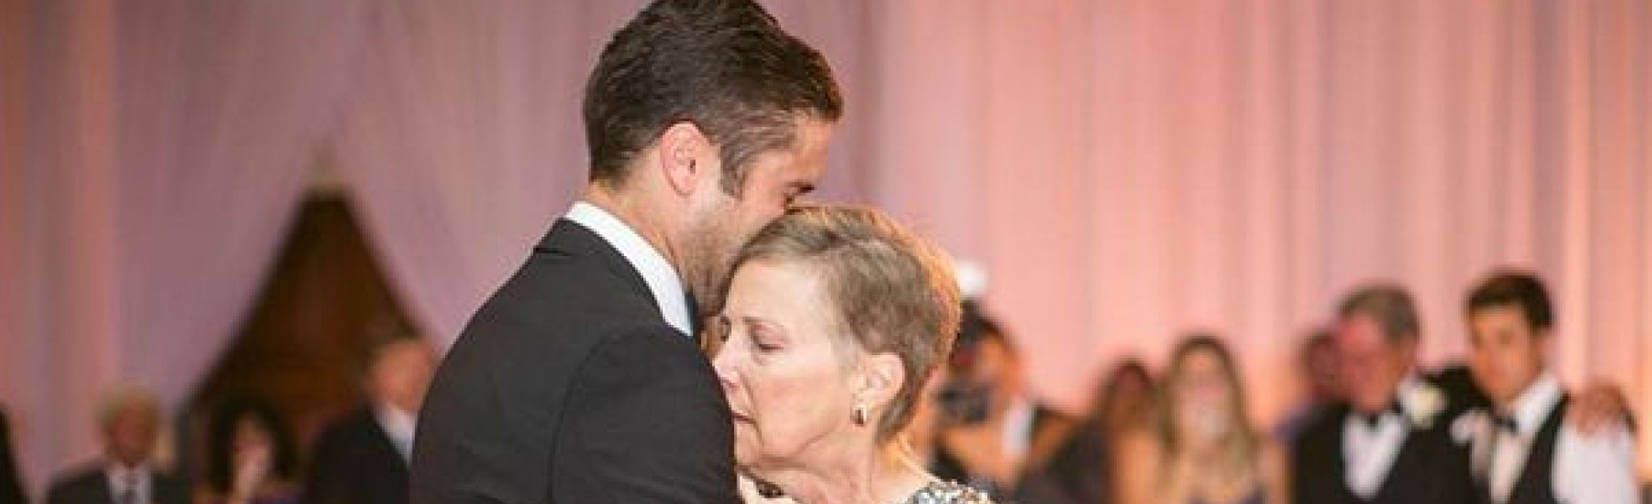 The Mother of the Groom, got her Final Wish before succumbing to cancer